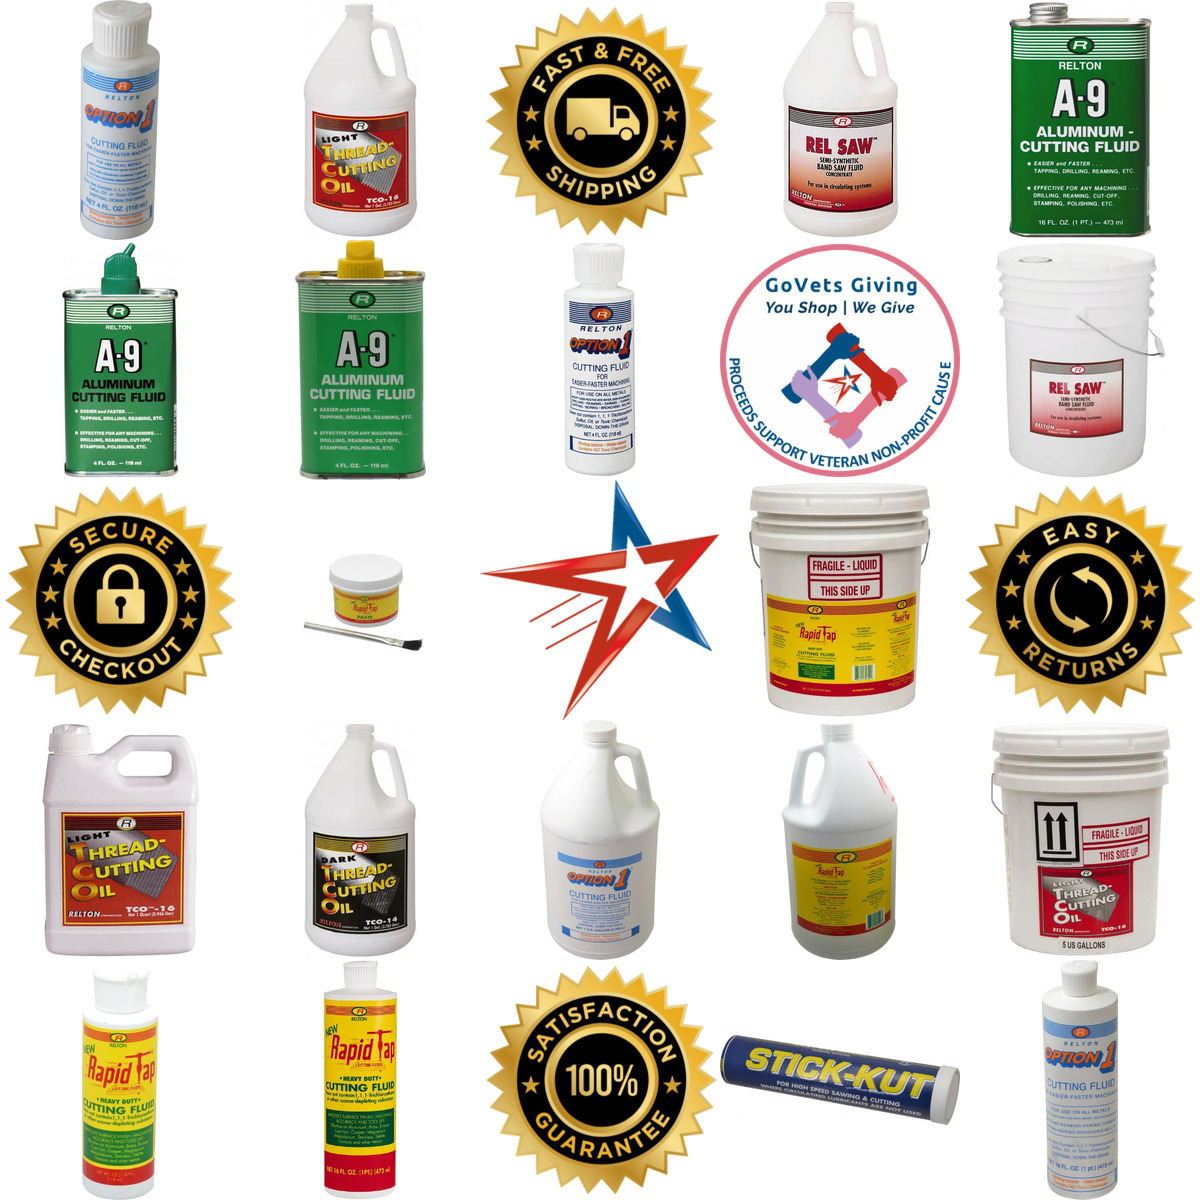 A selection of Relton products on GoVets